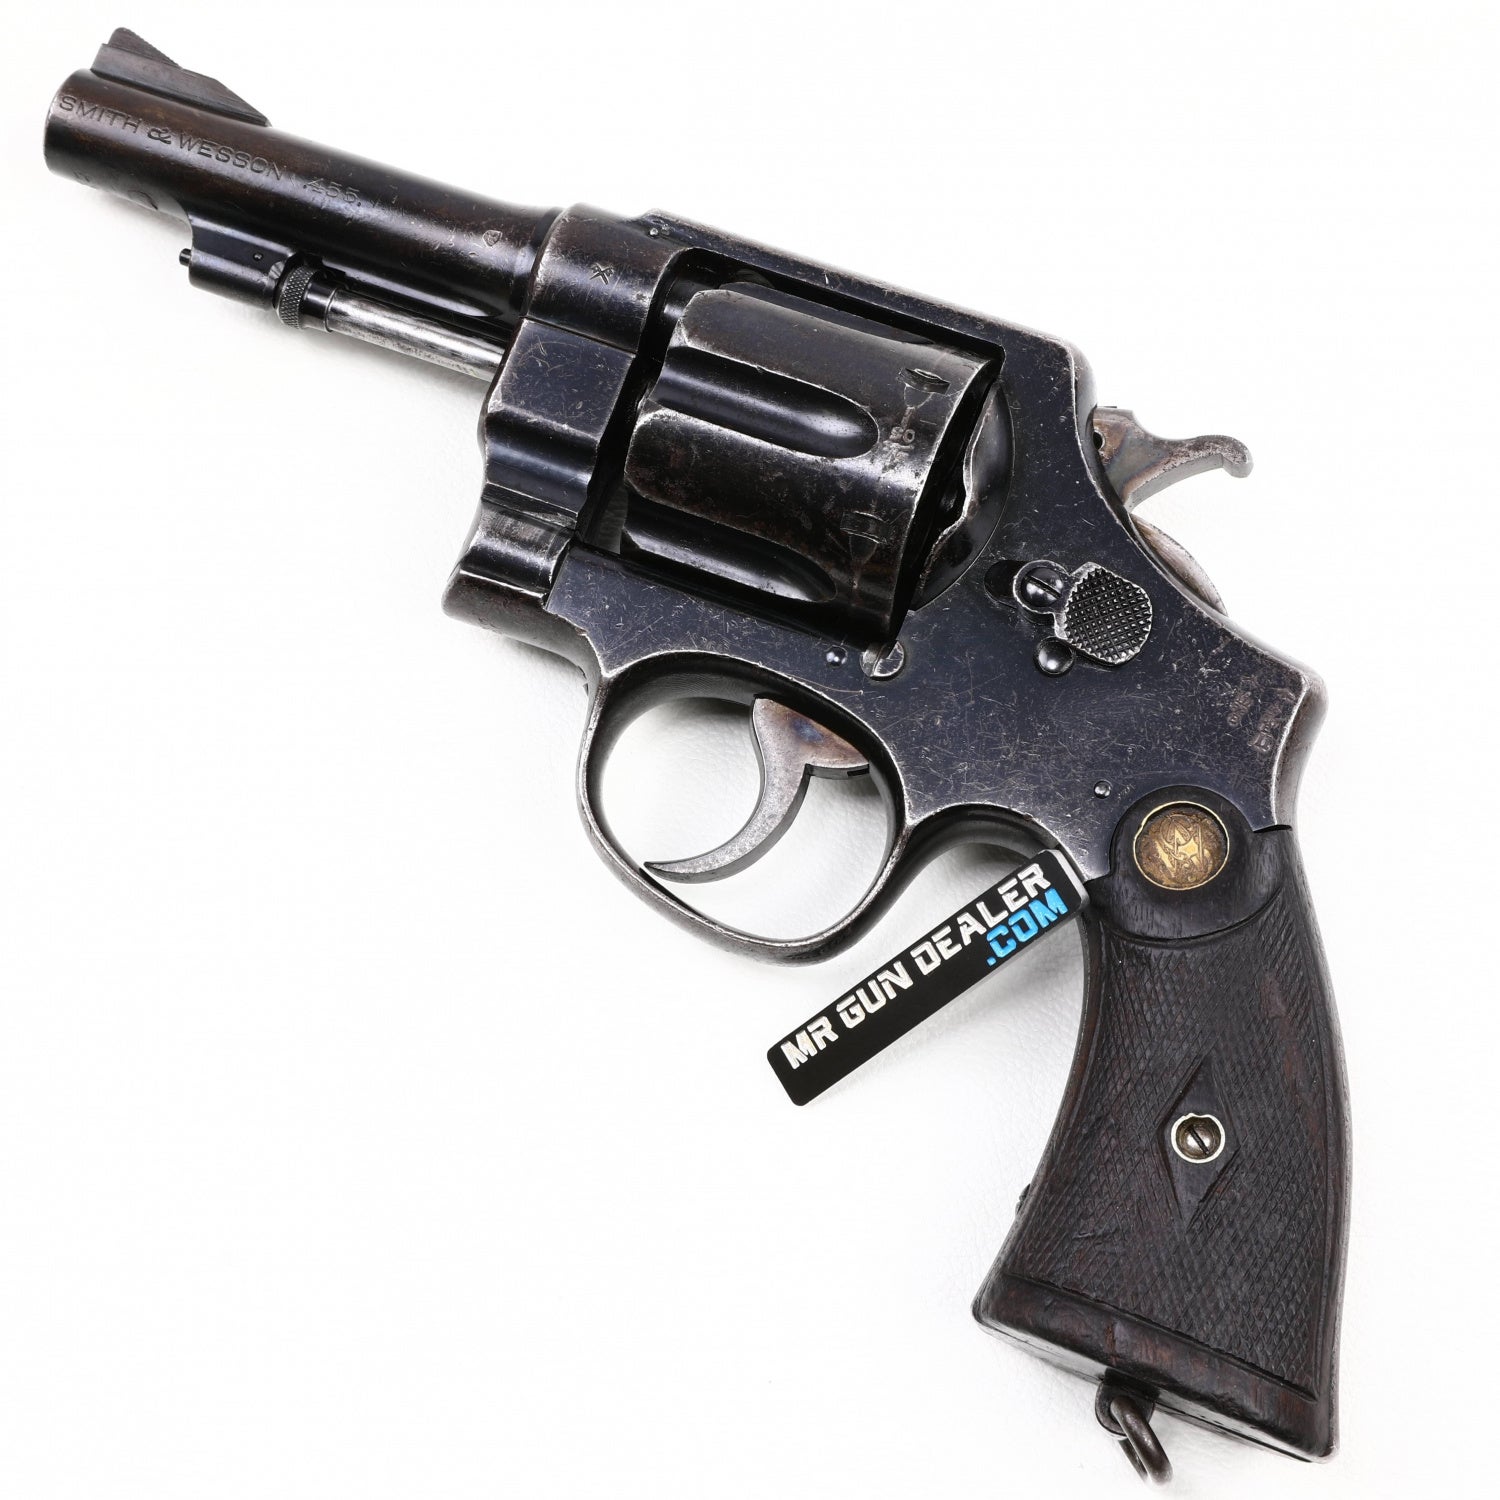 Indiana Jones' S&W Bapty Revolver from Raiders of the Lost Ark for Sale